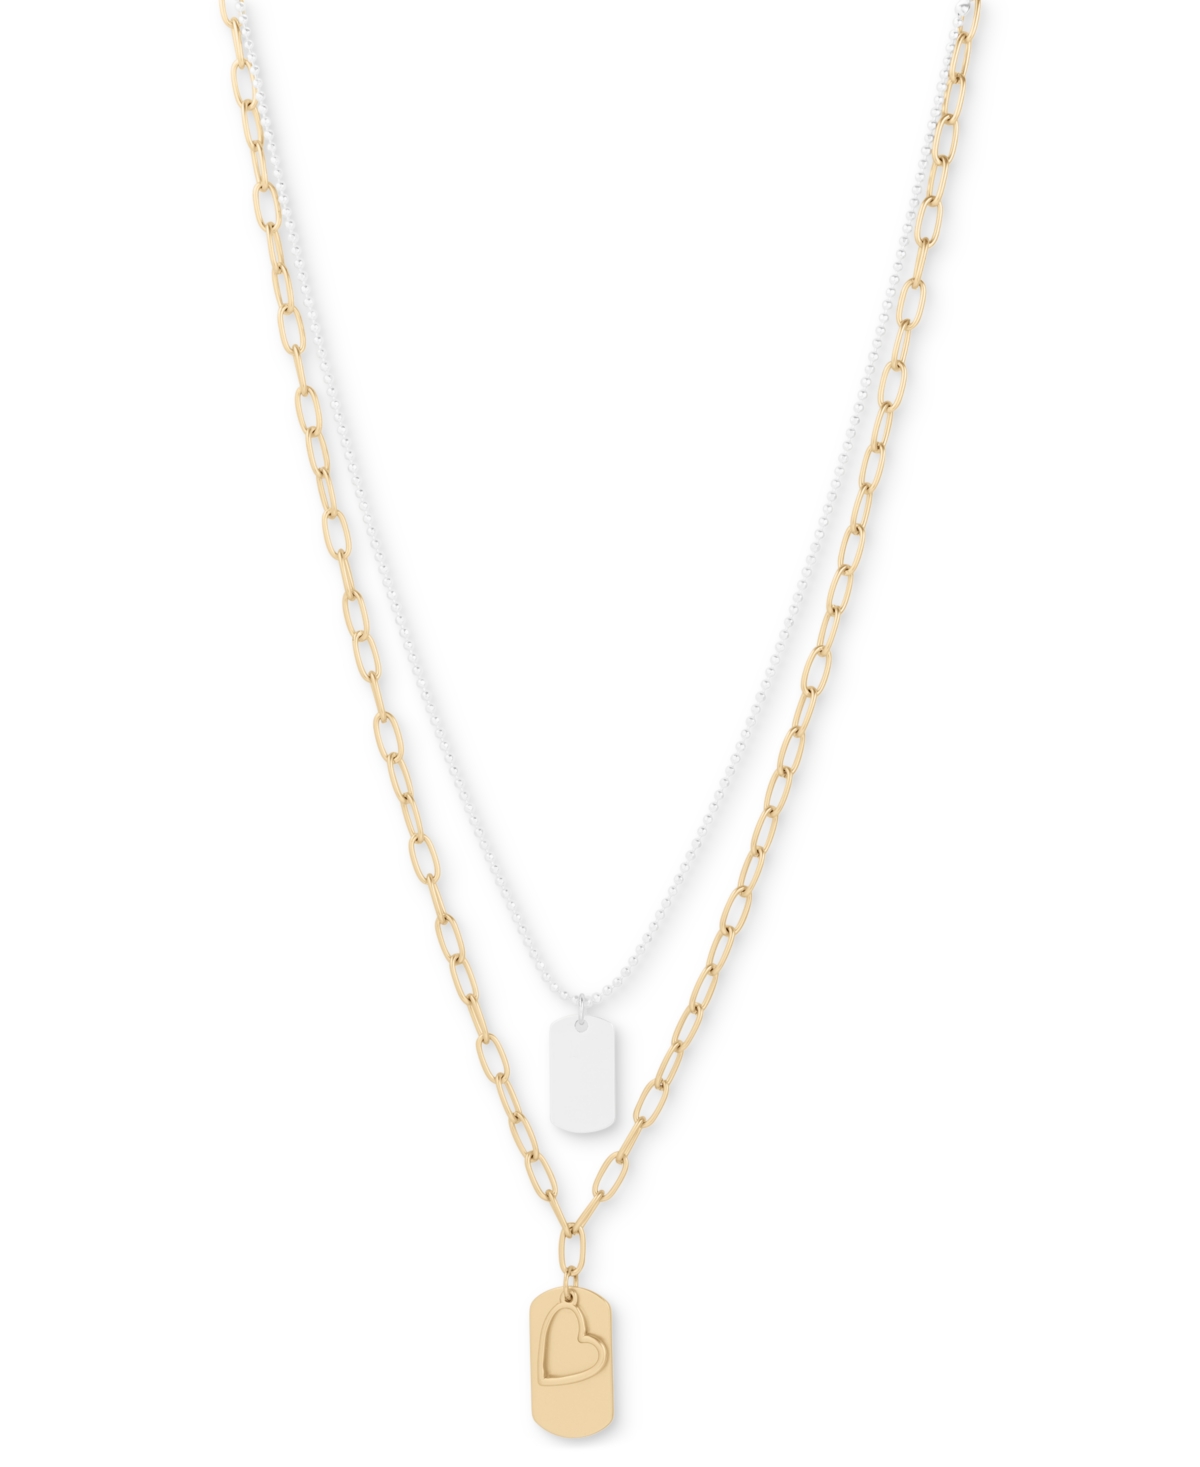 Lucky Brand Two-tone Heart & Tag Layered Pendant Necklace, 17-1/4" + 2" Extender In Yellow